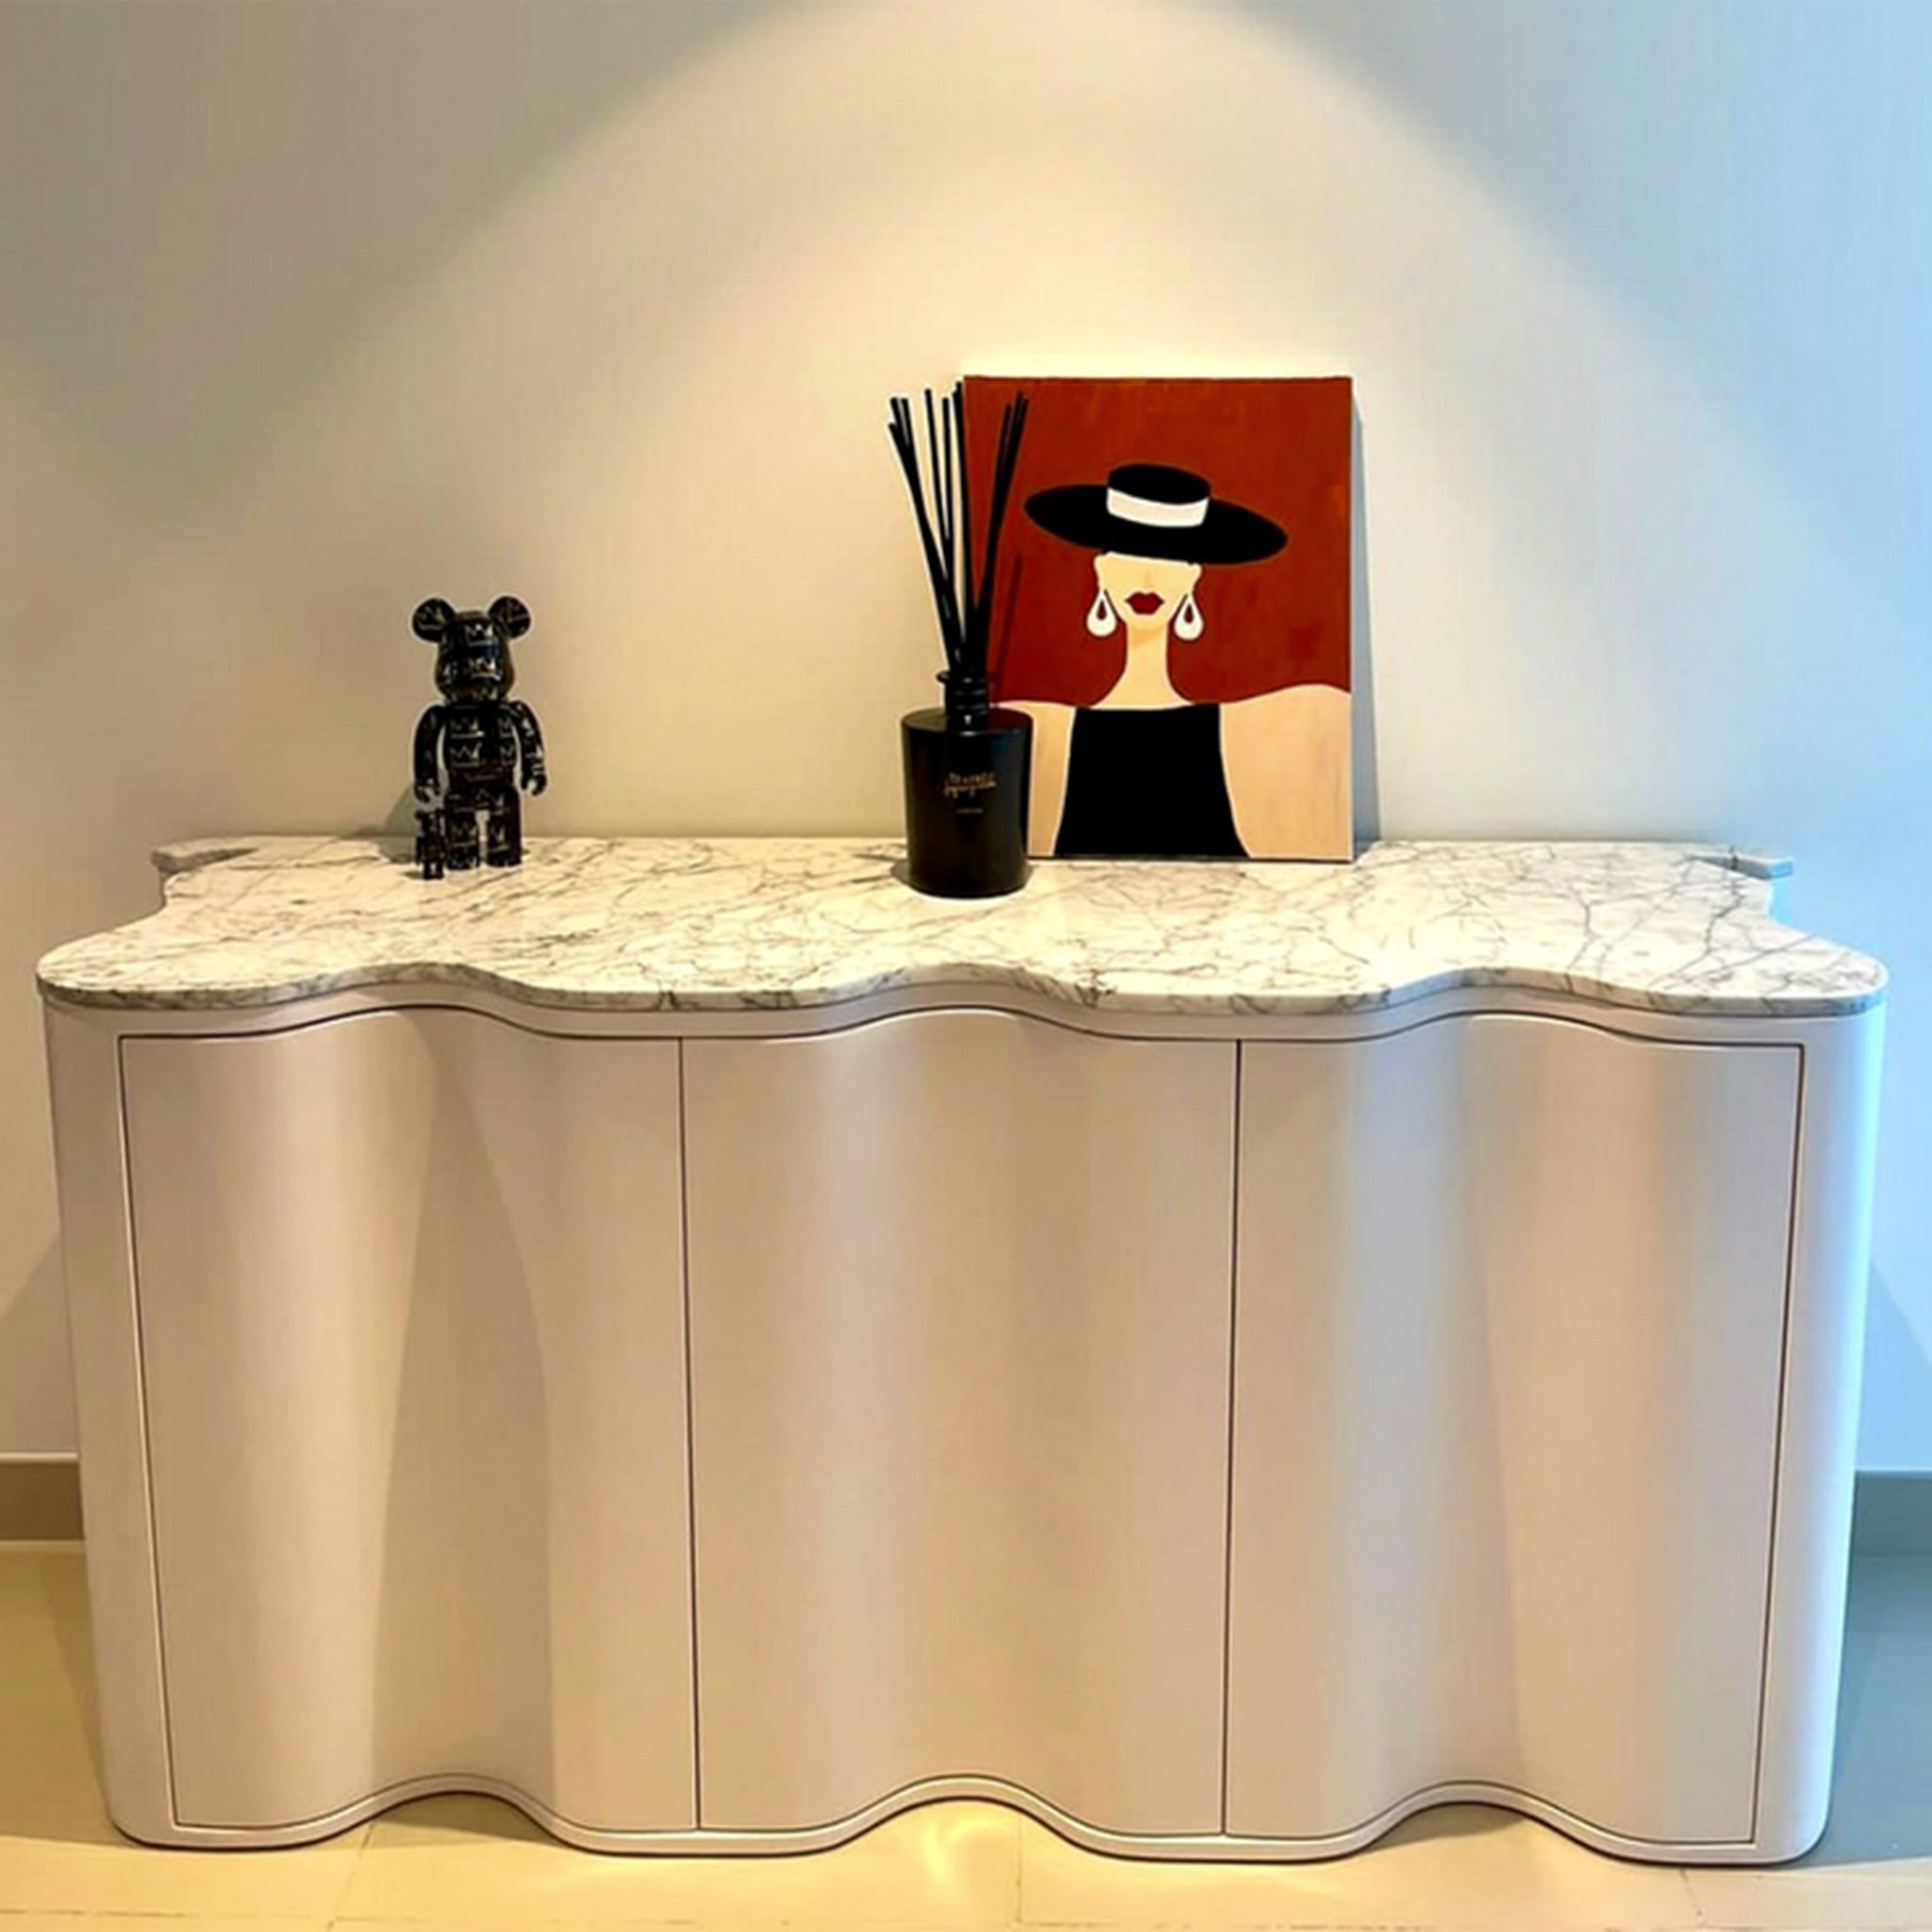 A stylish sideboard with a wavy front design and a white marble top, decorated with a black figurine, a reed diffuser, and a modern art painting of a woman in a hat. The sideboard is placed against a light gray wall in a contemporary living space.